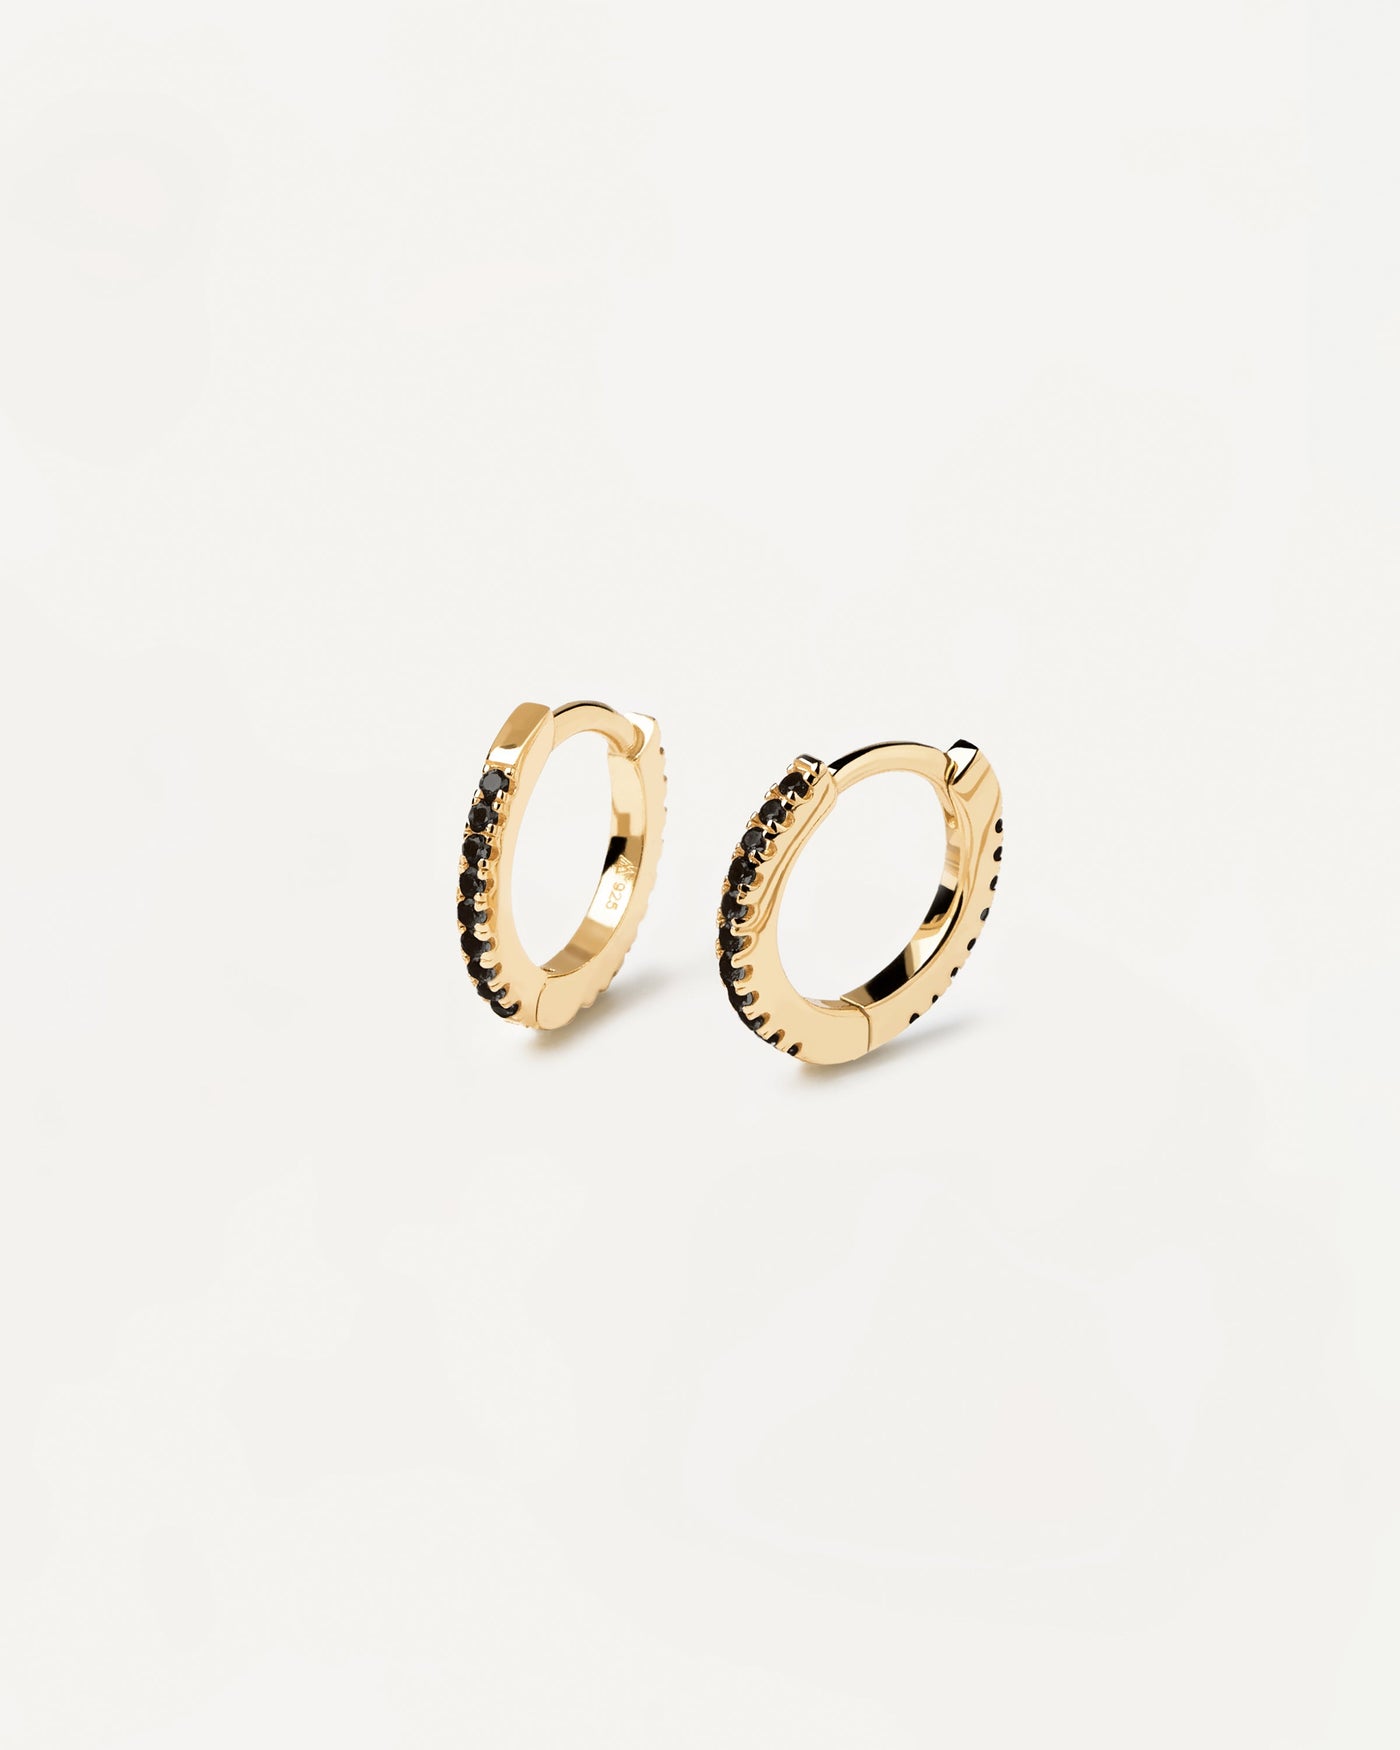 2023 Selection | Black Mini Hoops. Hoop latch-back earrings in 18k gold plated silver set with black zirconia. Get the latest arrival from PDPAOLA. Place your order safely and get this Best Seller. Free Shipping.